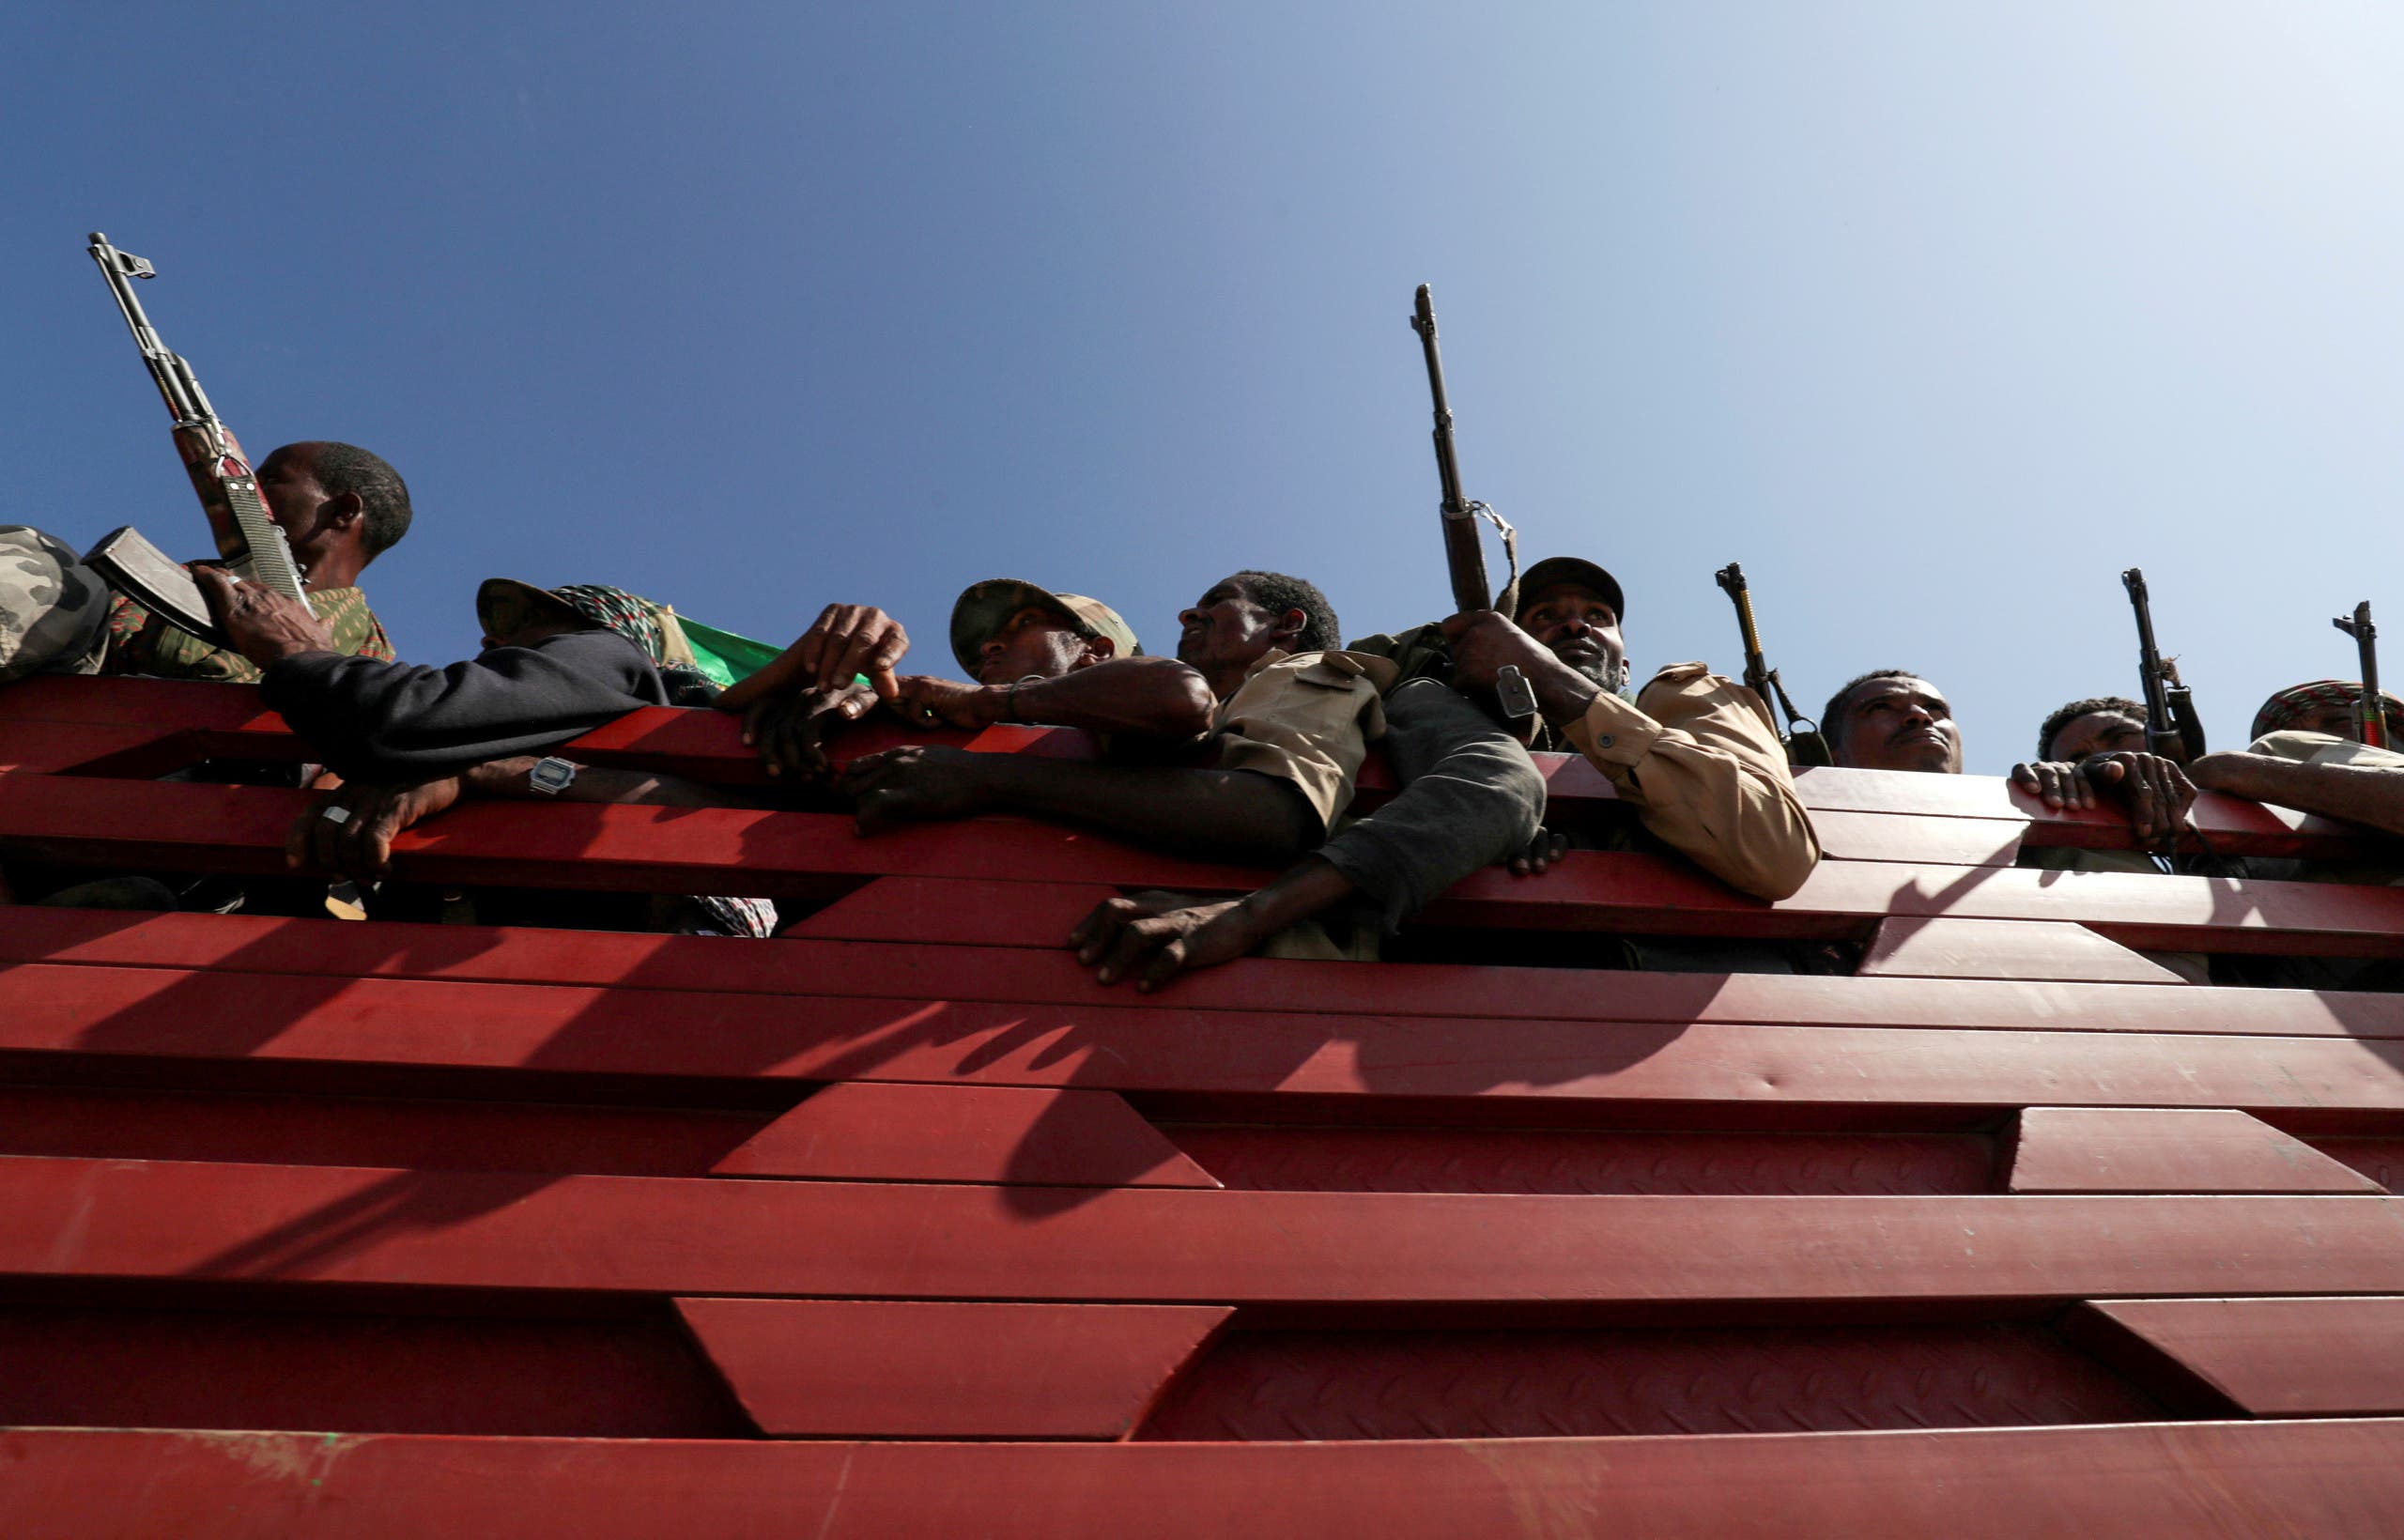 Militia members from Ethiopia's Amhara region ride on their truck as they head to face the Tigray People's Liberation Front (TPLF), in Sanja, Amhara region near a border with Tigray, Ethiopia, November 9, 2020. (Reuters)